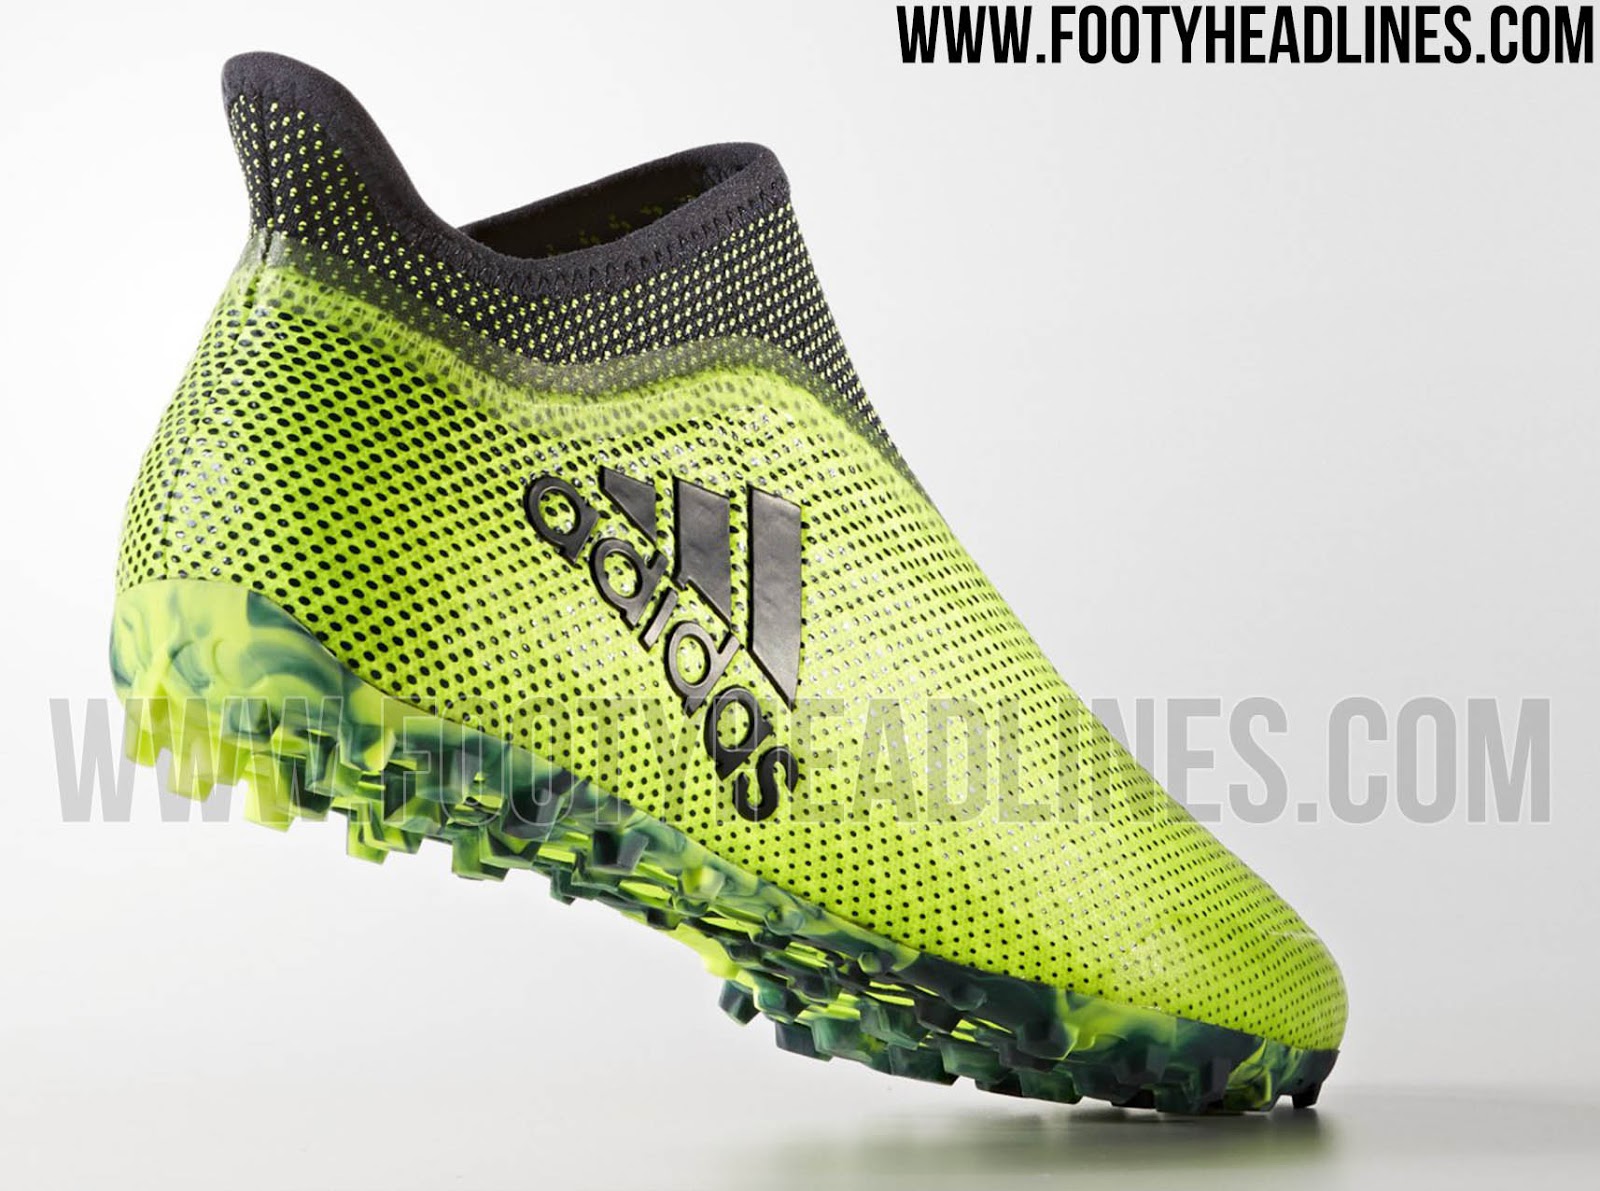 Piñón Psicologicamente disparar Laceless Adidas X Tango 17+ Purespeed Ocean Storm Pack Boots Released -  Footy Headlines